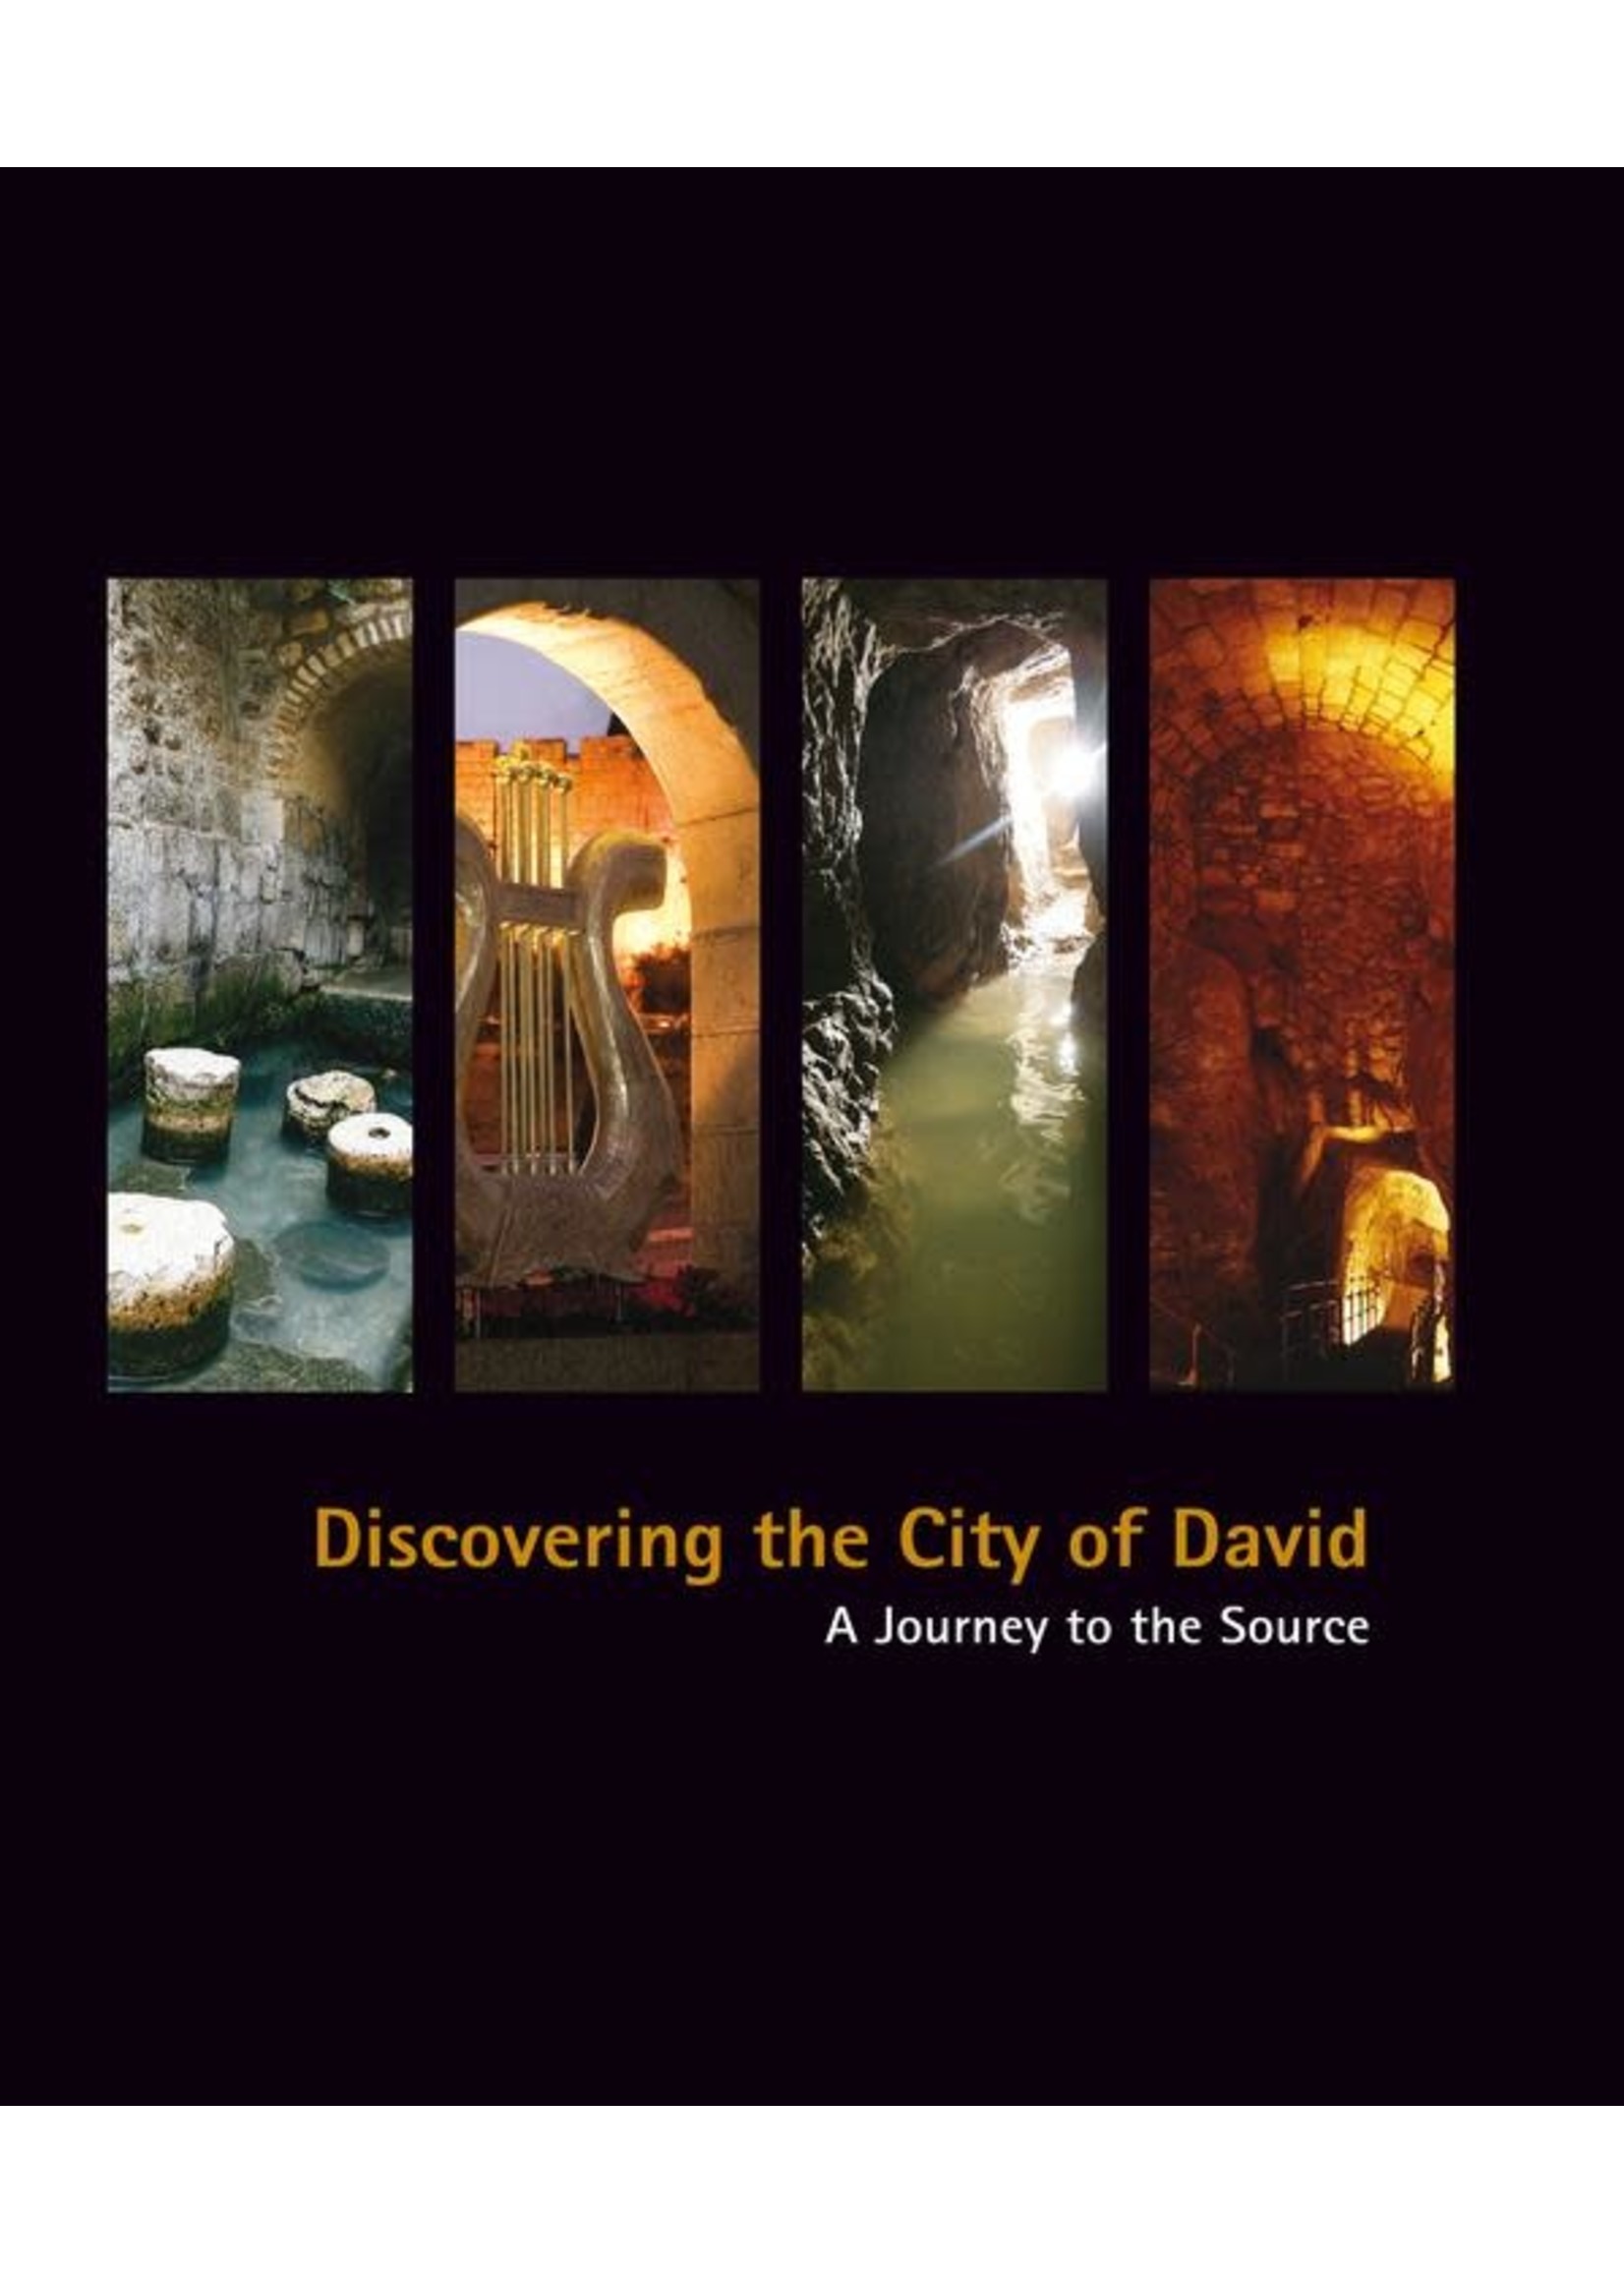 DISCOVERING THE CITY OF DAVID